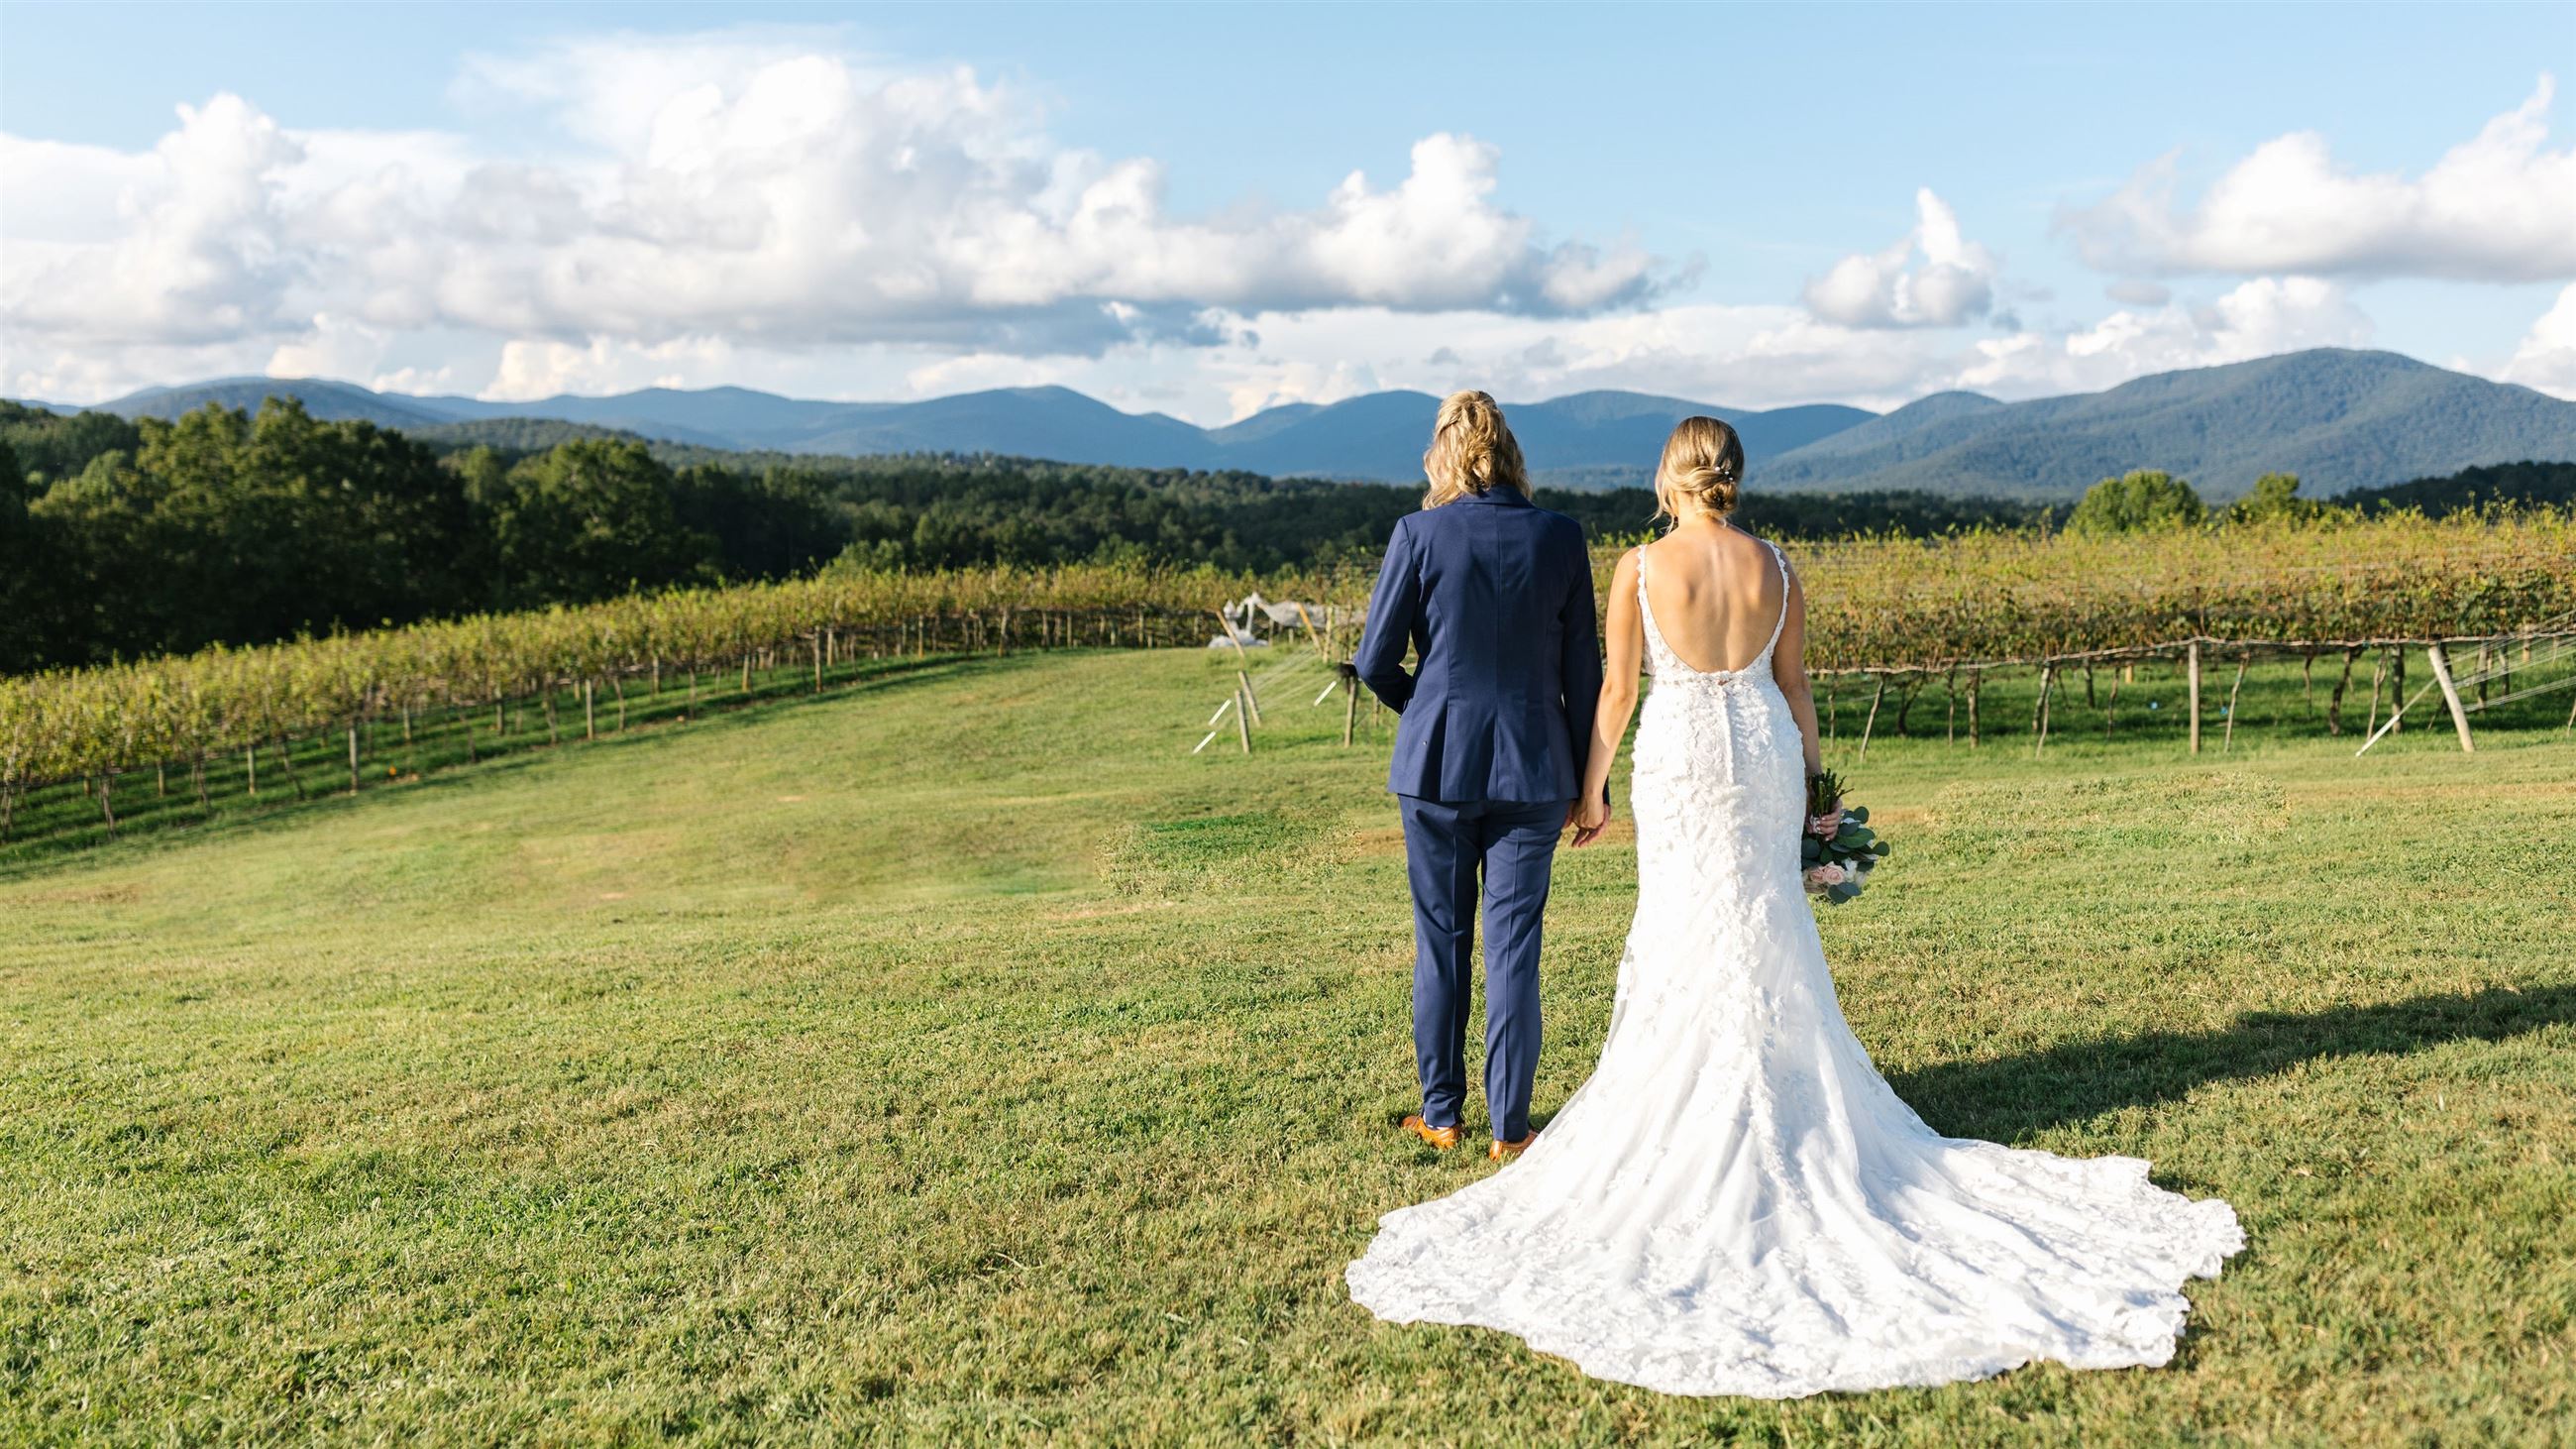 Meant to Be—A Romantic Vineyard Wedding During COVID-19 Desktop Image